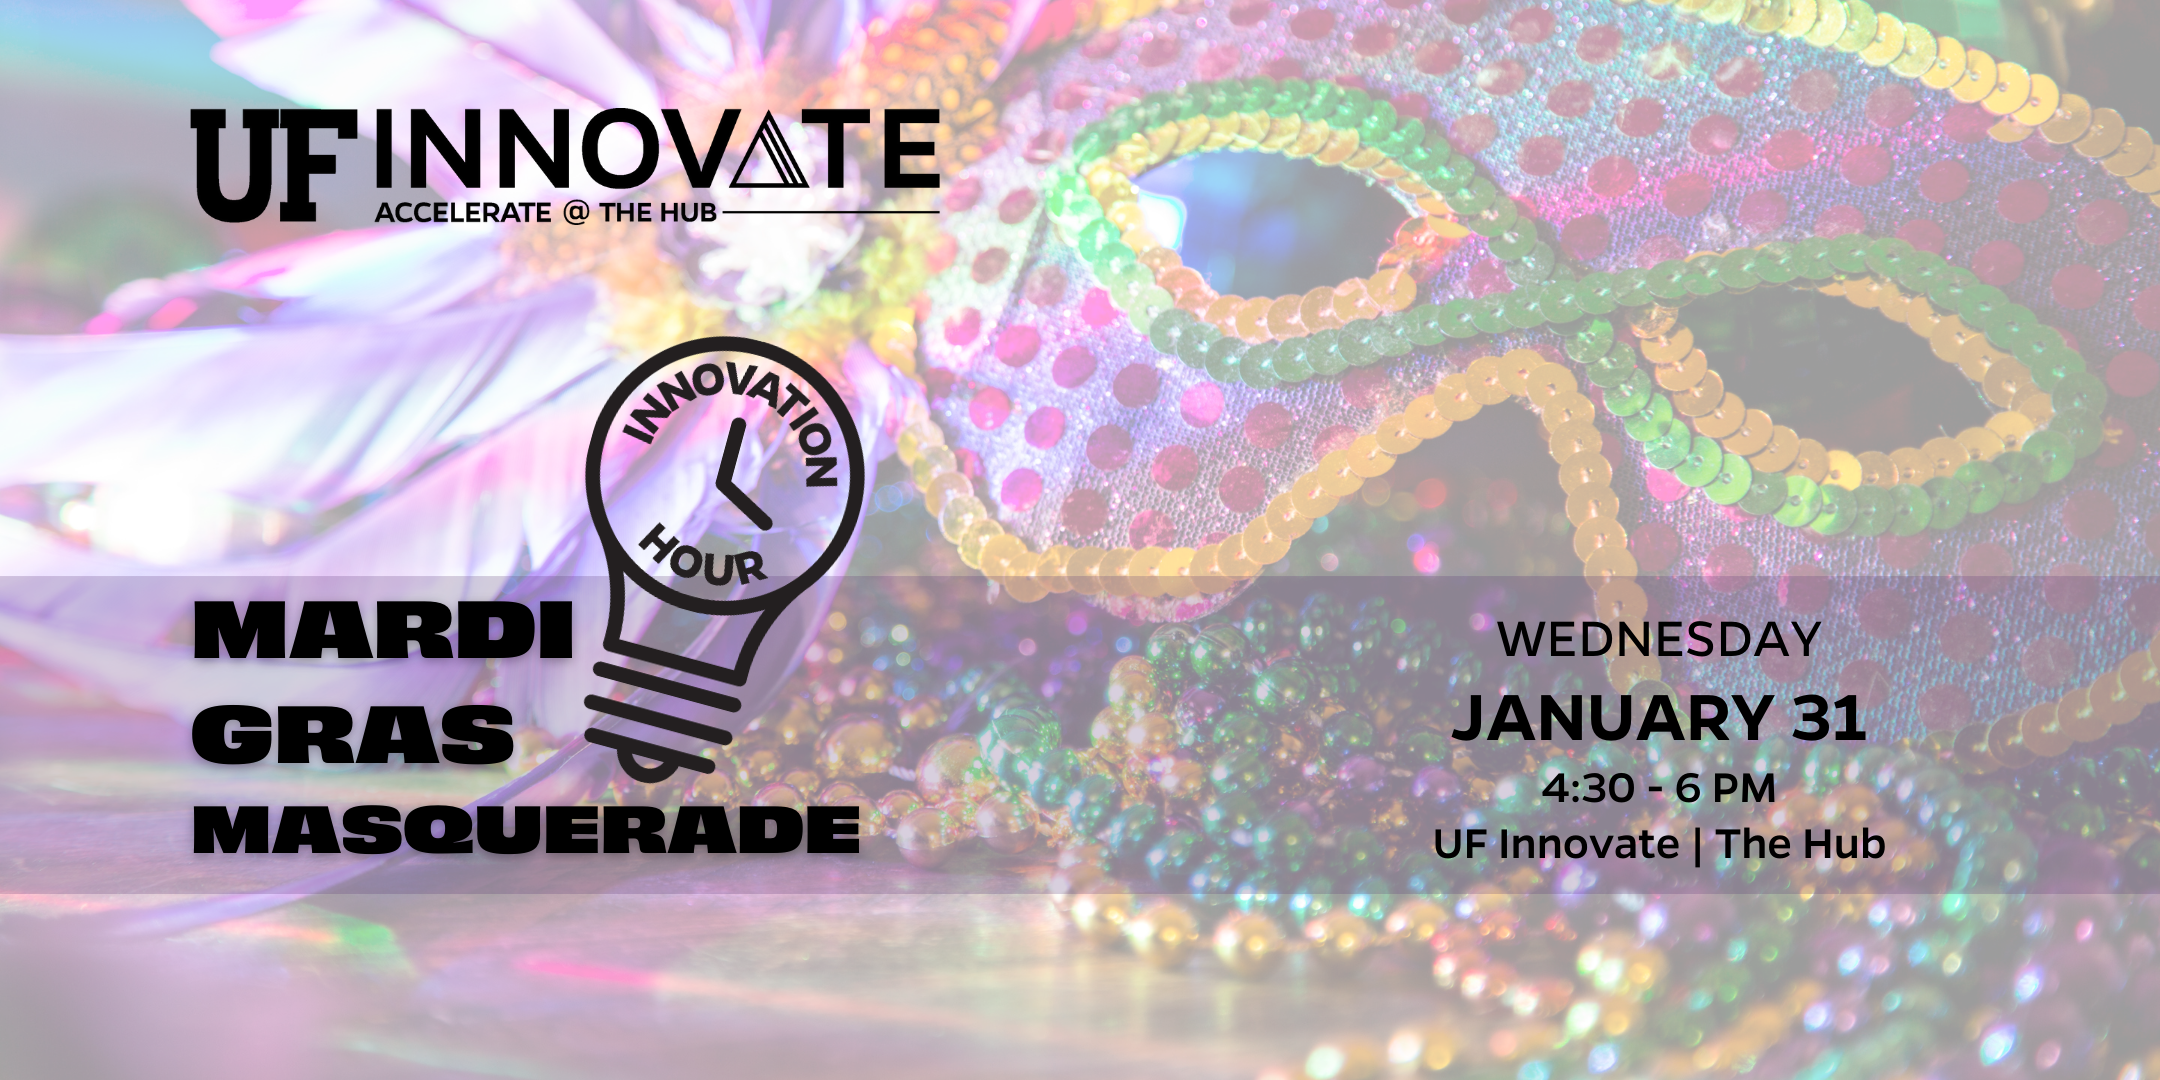 graphic announcing an innovation hour networking event at UF Innovate Accelerate at The Hub. The theme is Mardi Gras Masquerade.